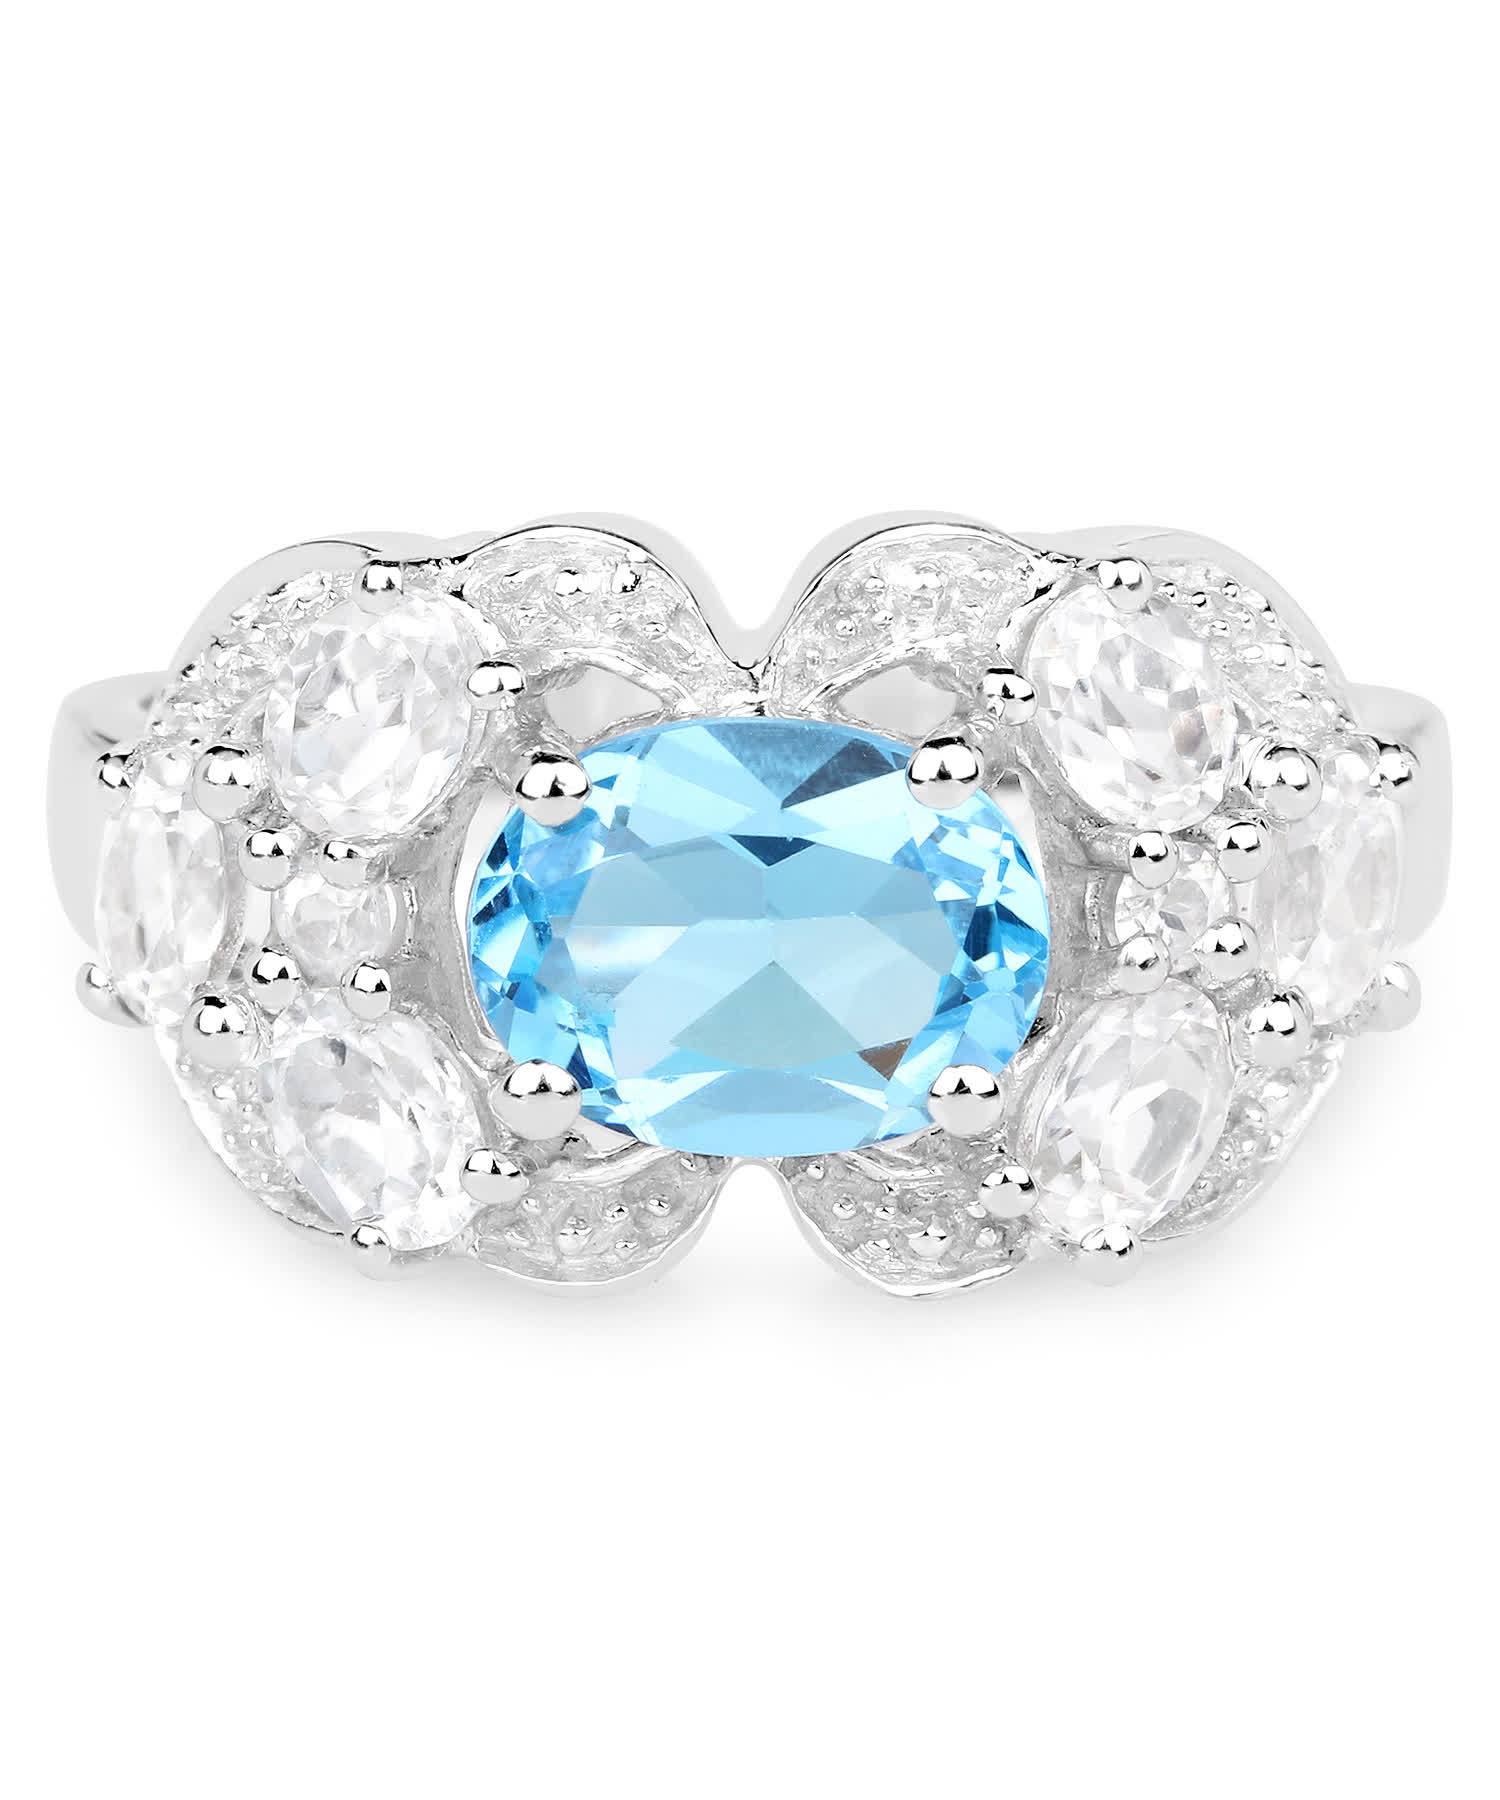 3.20ctw Natural Sky Blue Topaz and Zircon Rhodium Plated 925 Sterling Silver Ring View 3